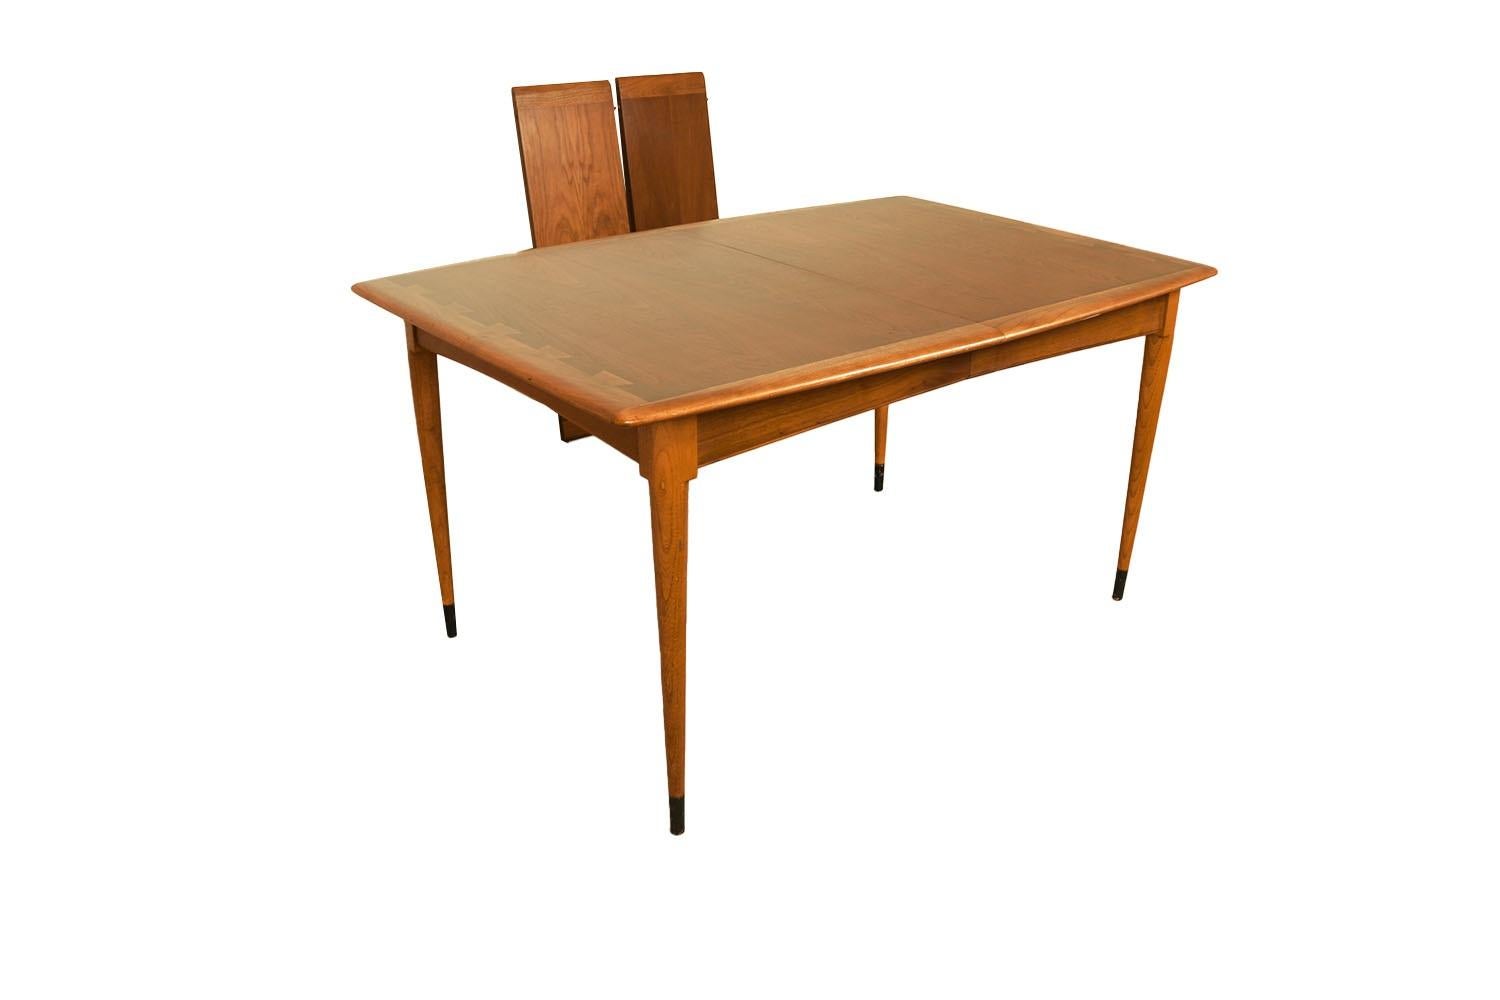 Beautiful Mid-Century Modern expandable, Dovetail Dining Table, in great original condition, manufactured by Lane. Features richly grained, rectangle top accented with dovetailed border. Raised over four tapered legs, creating a clean and elegant